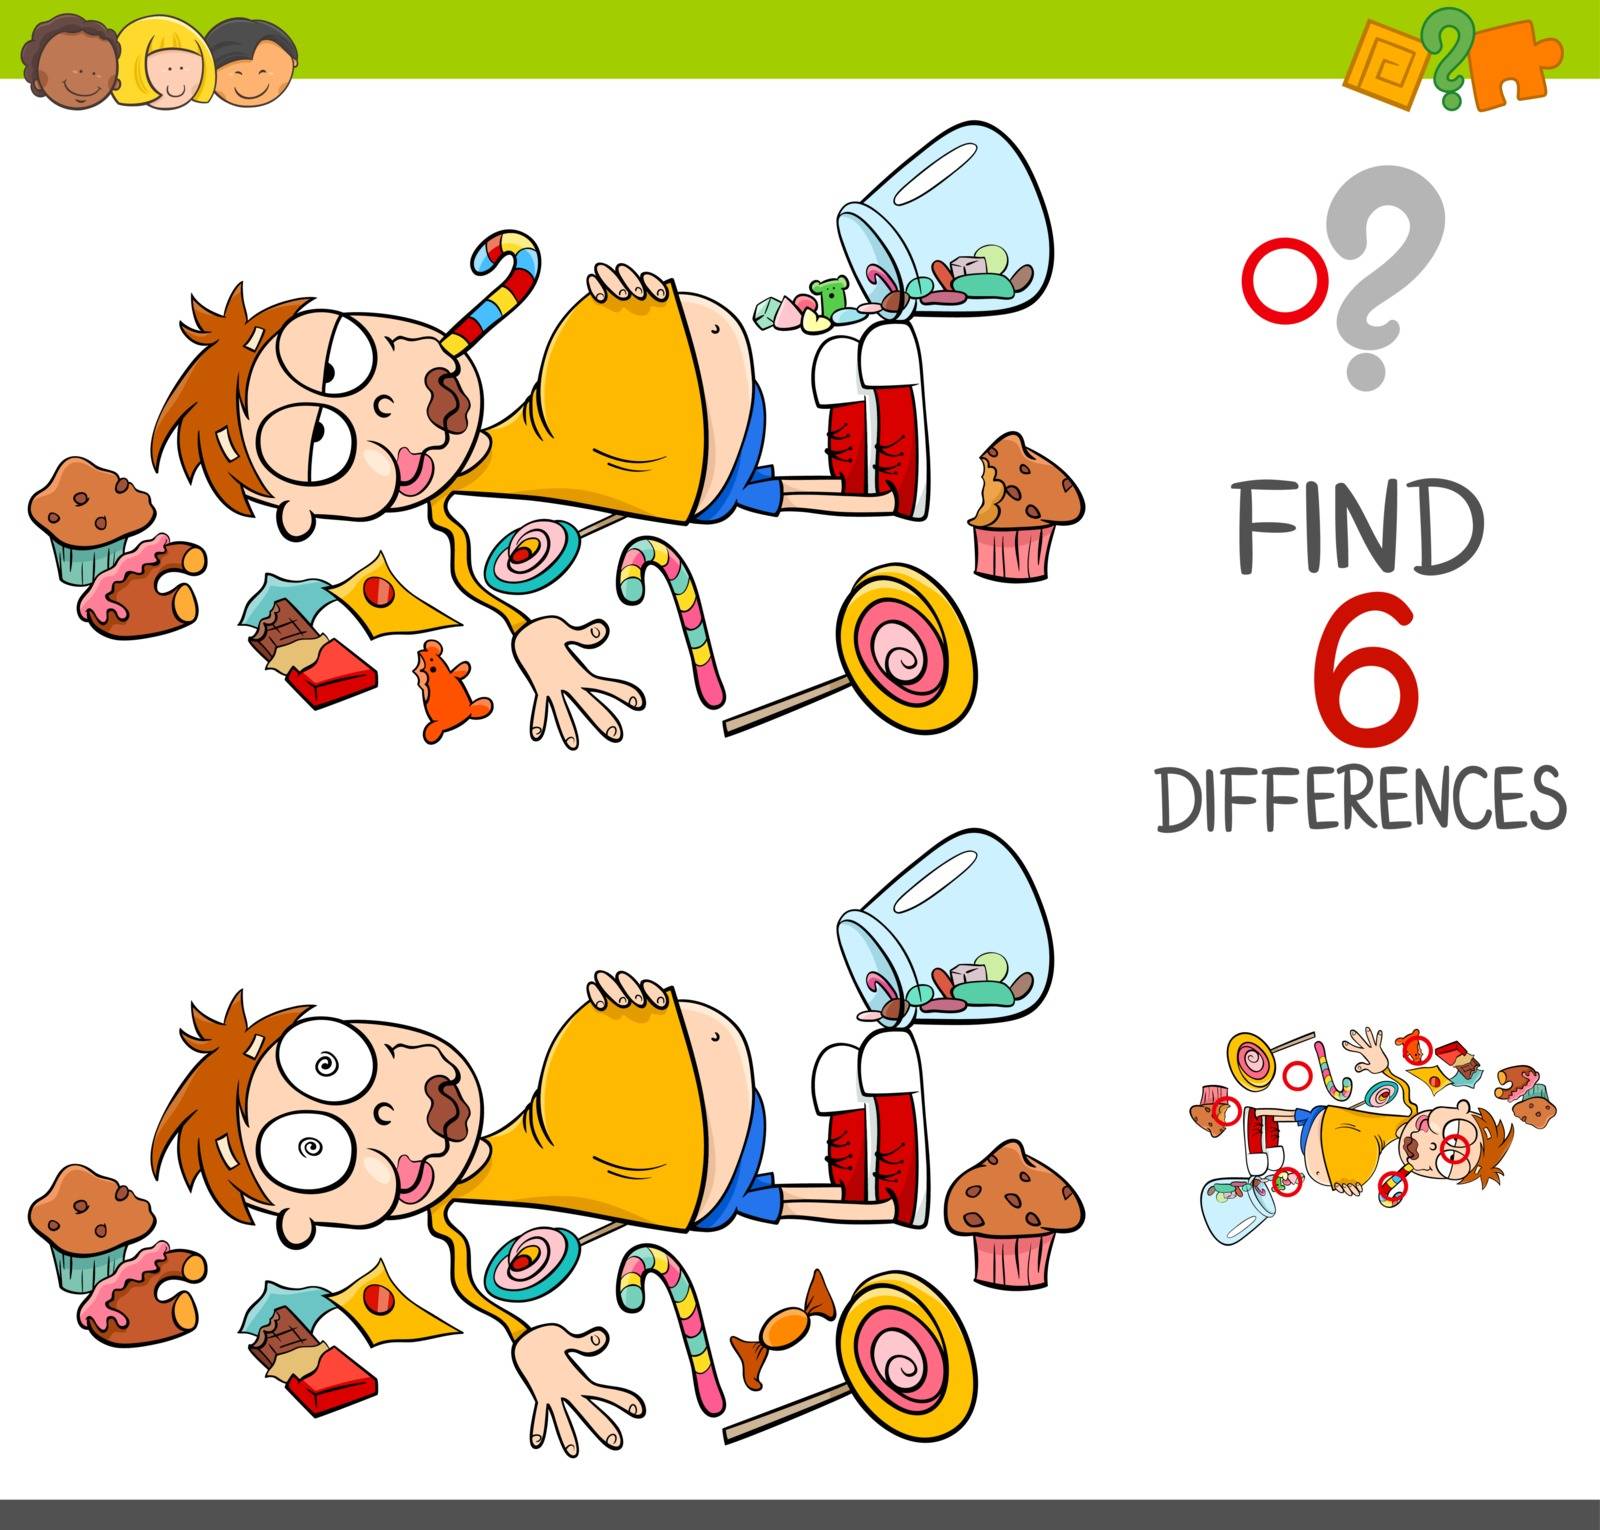 Cartoon Illustration of Spot the Differences Educational Activity Game for Children with Kid in a Candy Store